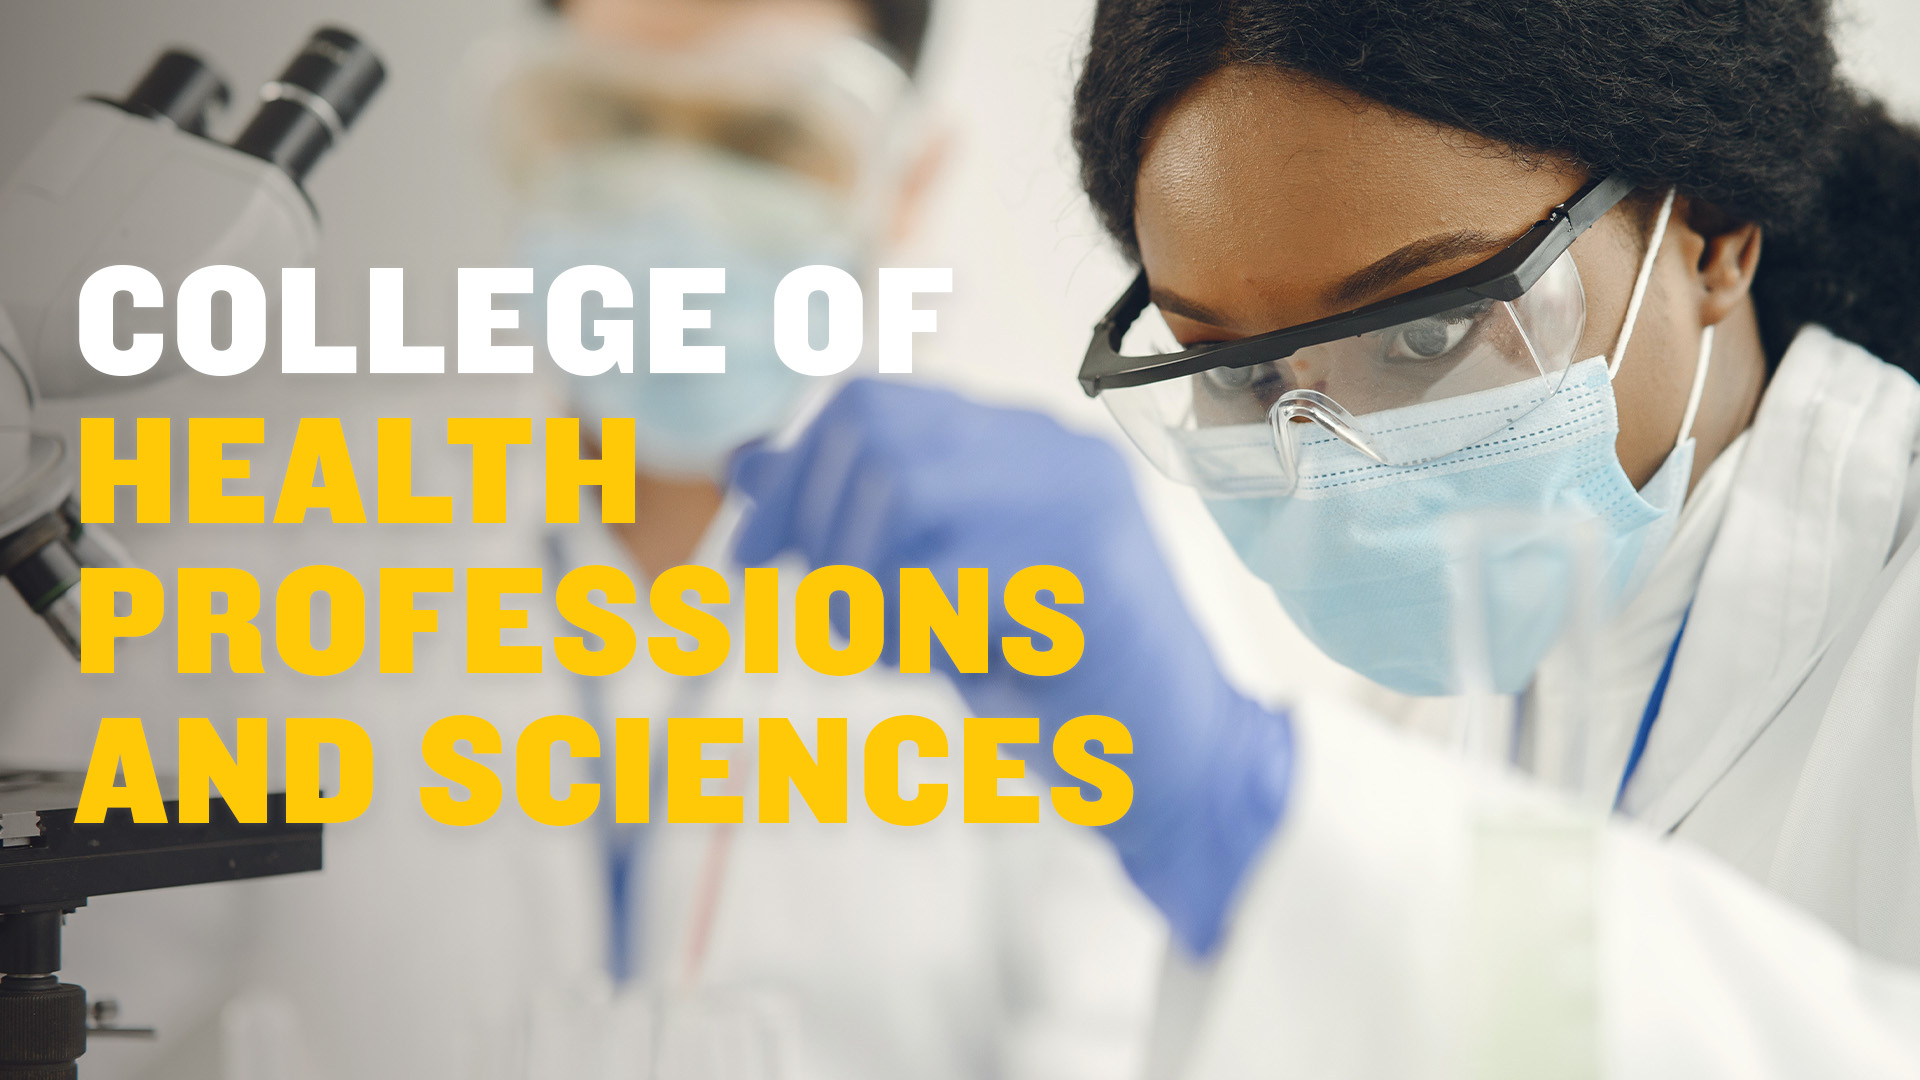 College of Health Professions and Sciences banner